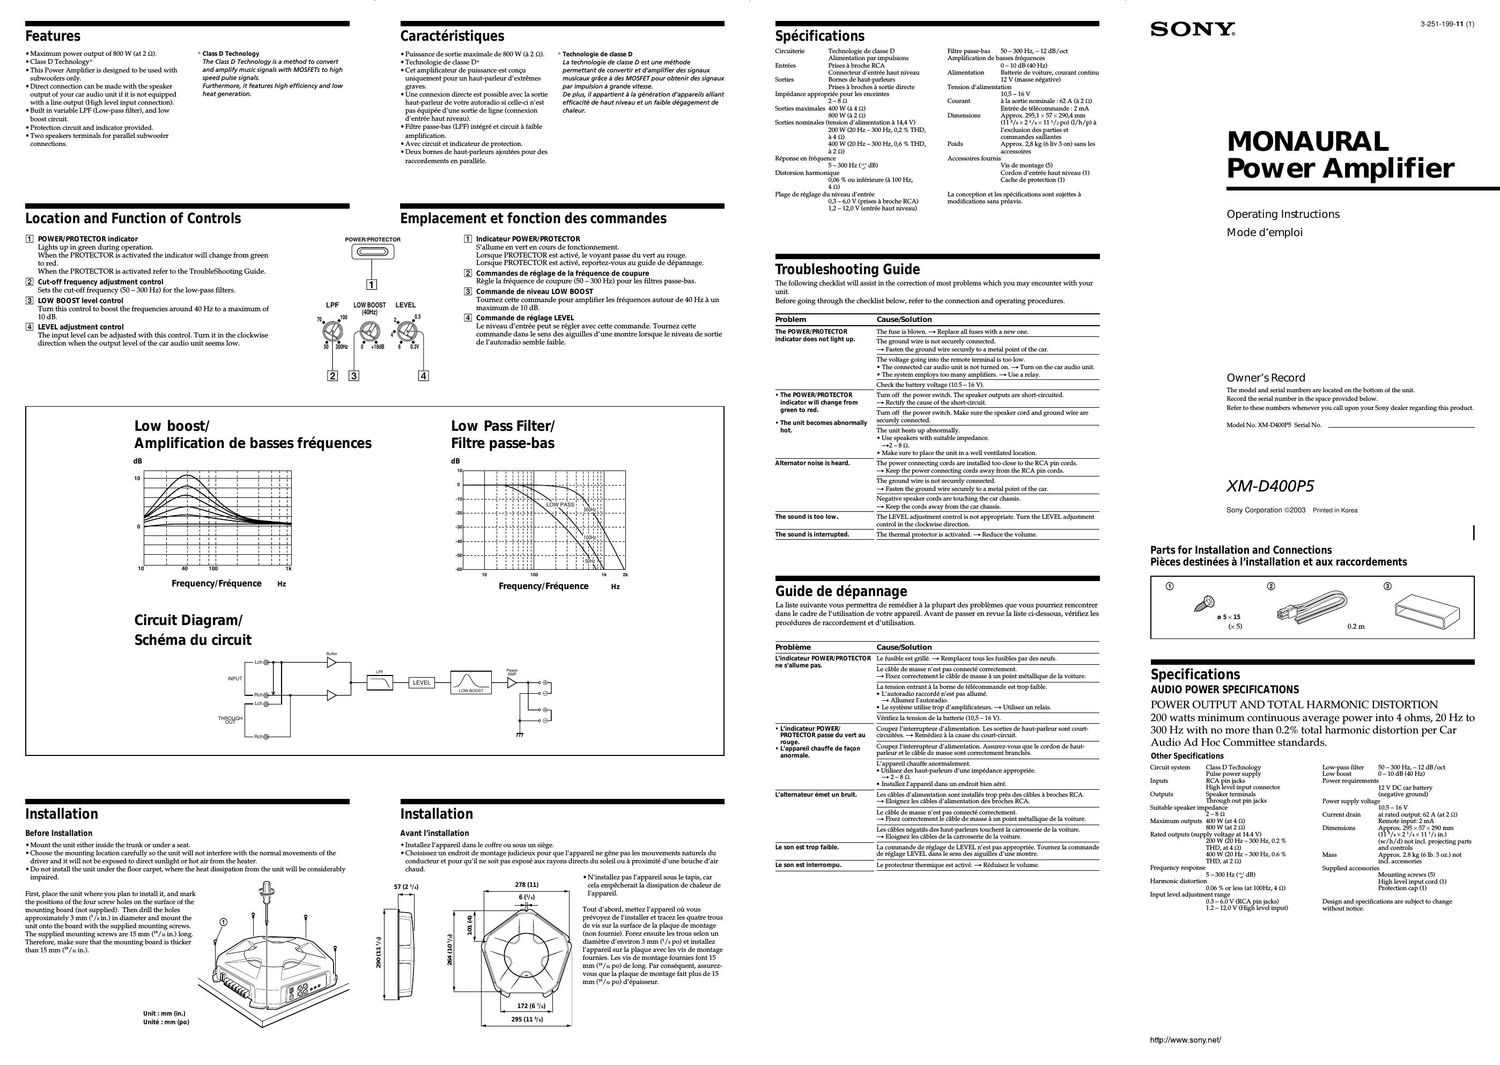 sony xmd 400 p 5 owners manual